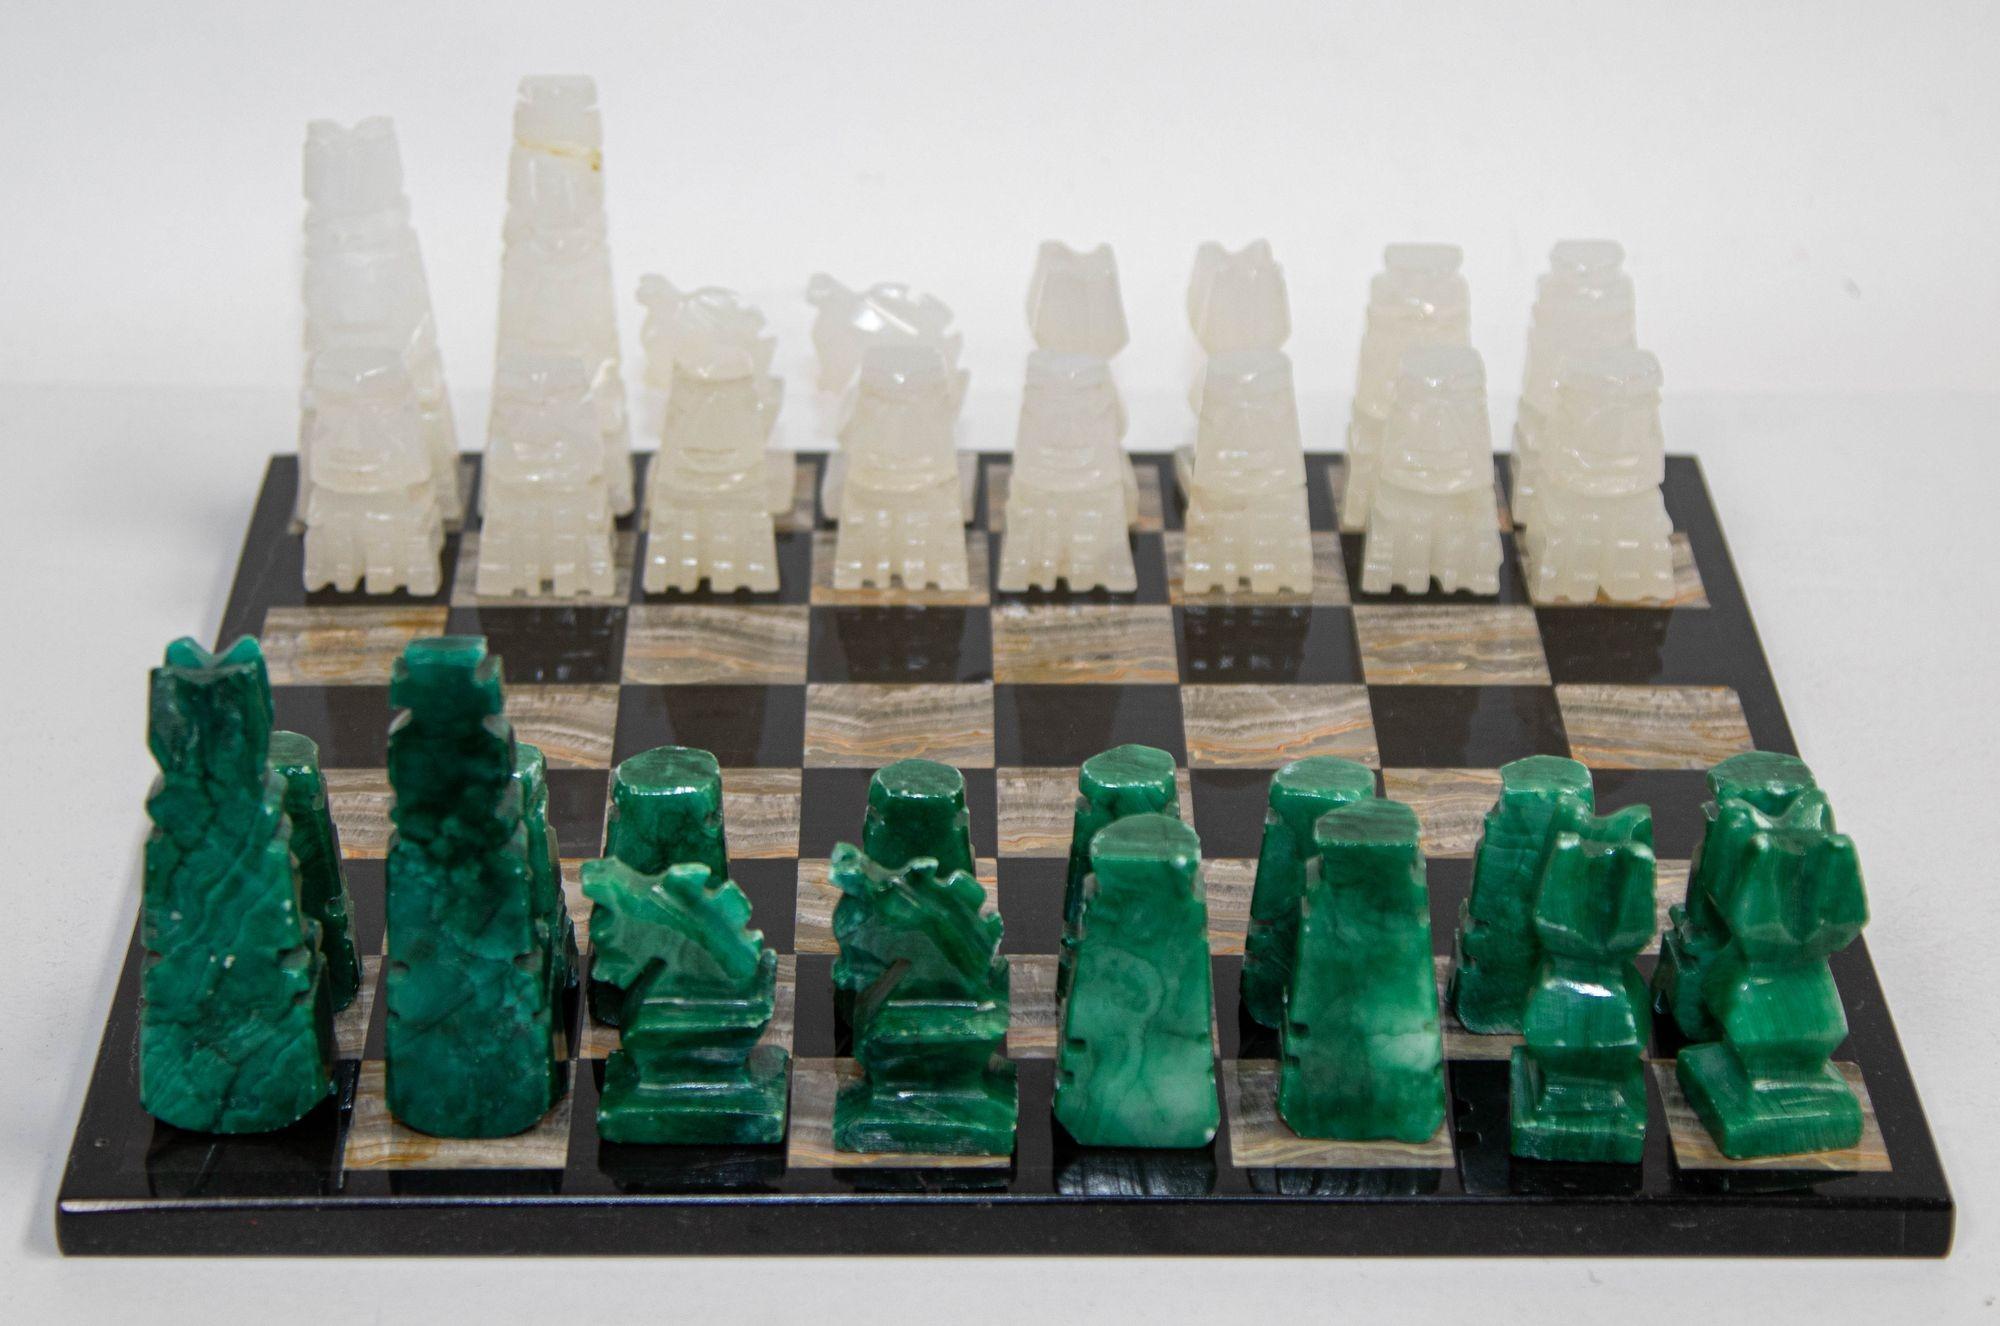 Grand jeu d'échecs vintage en marbre avec pièces en onyx vert sculptées à la main.
Vintage mid 20th century Mexican stone marble chess set complete chess board in brown and black marble stone with elaborately hand carved green and white chess